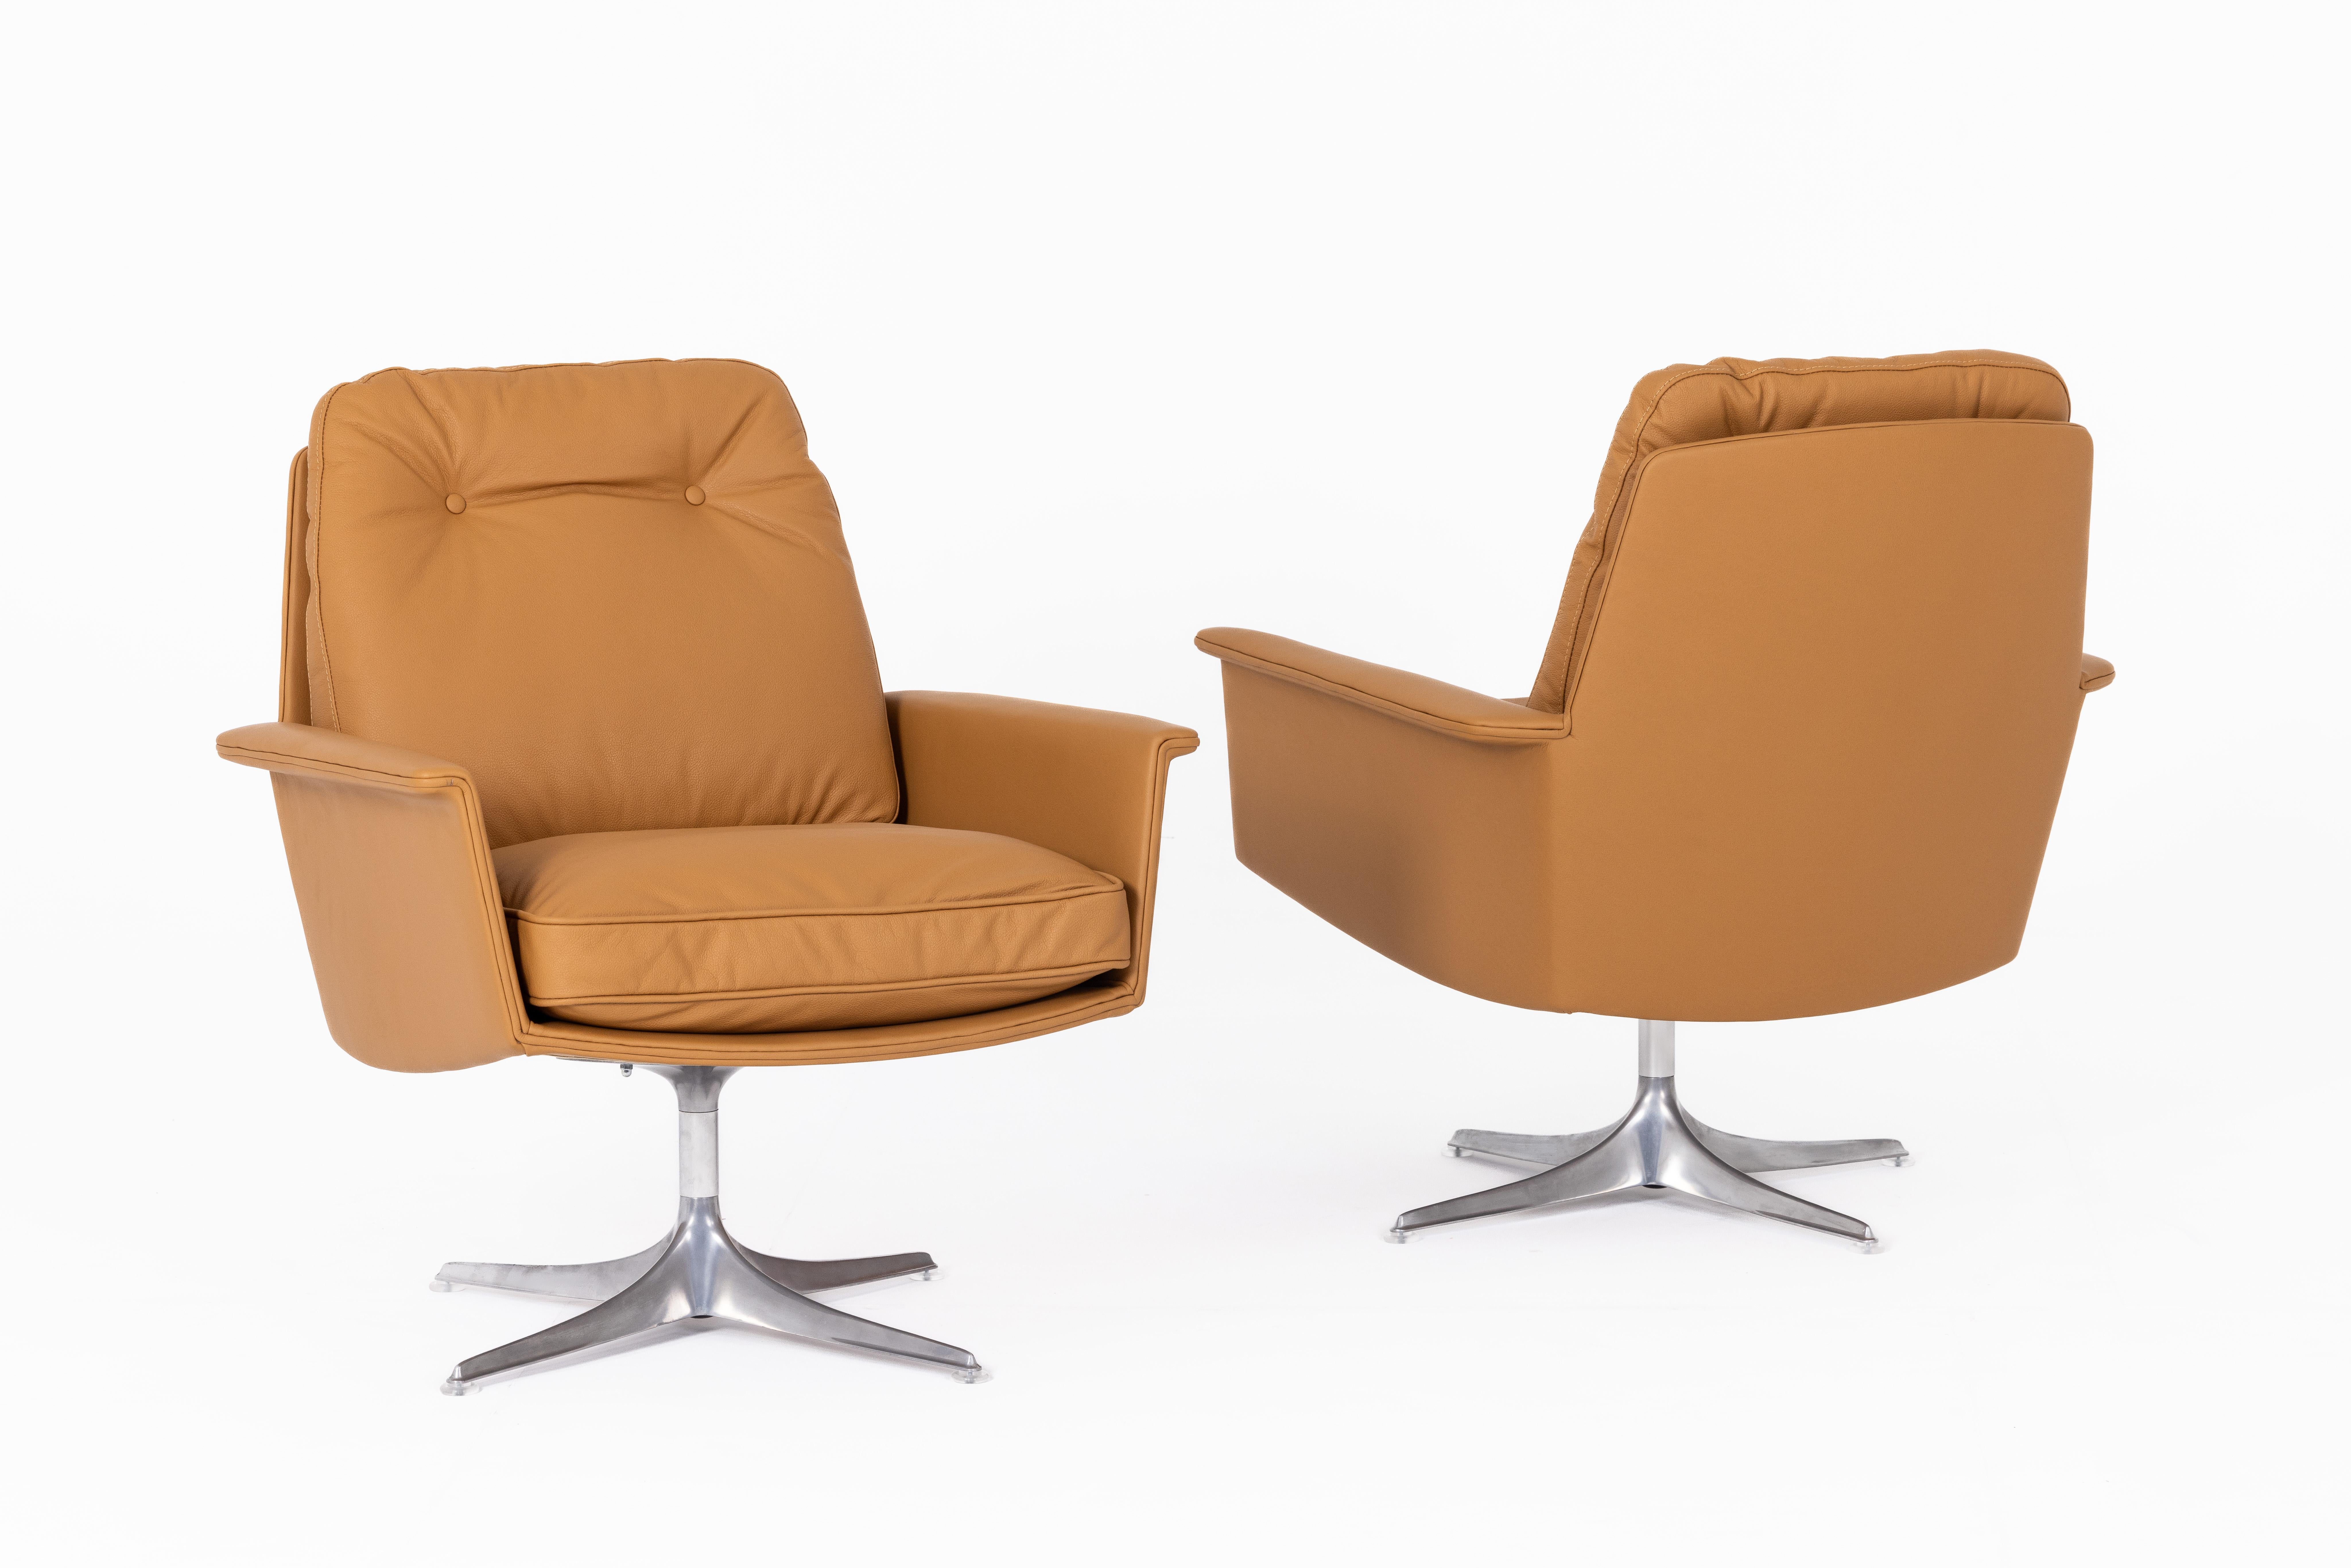 Set of two Horst Brüning swivel armchairs for COR, Germany 1960s, fully restored, aluminum, cognac-colored premium Italian leather